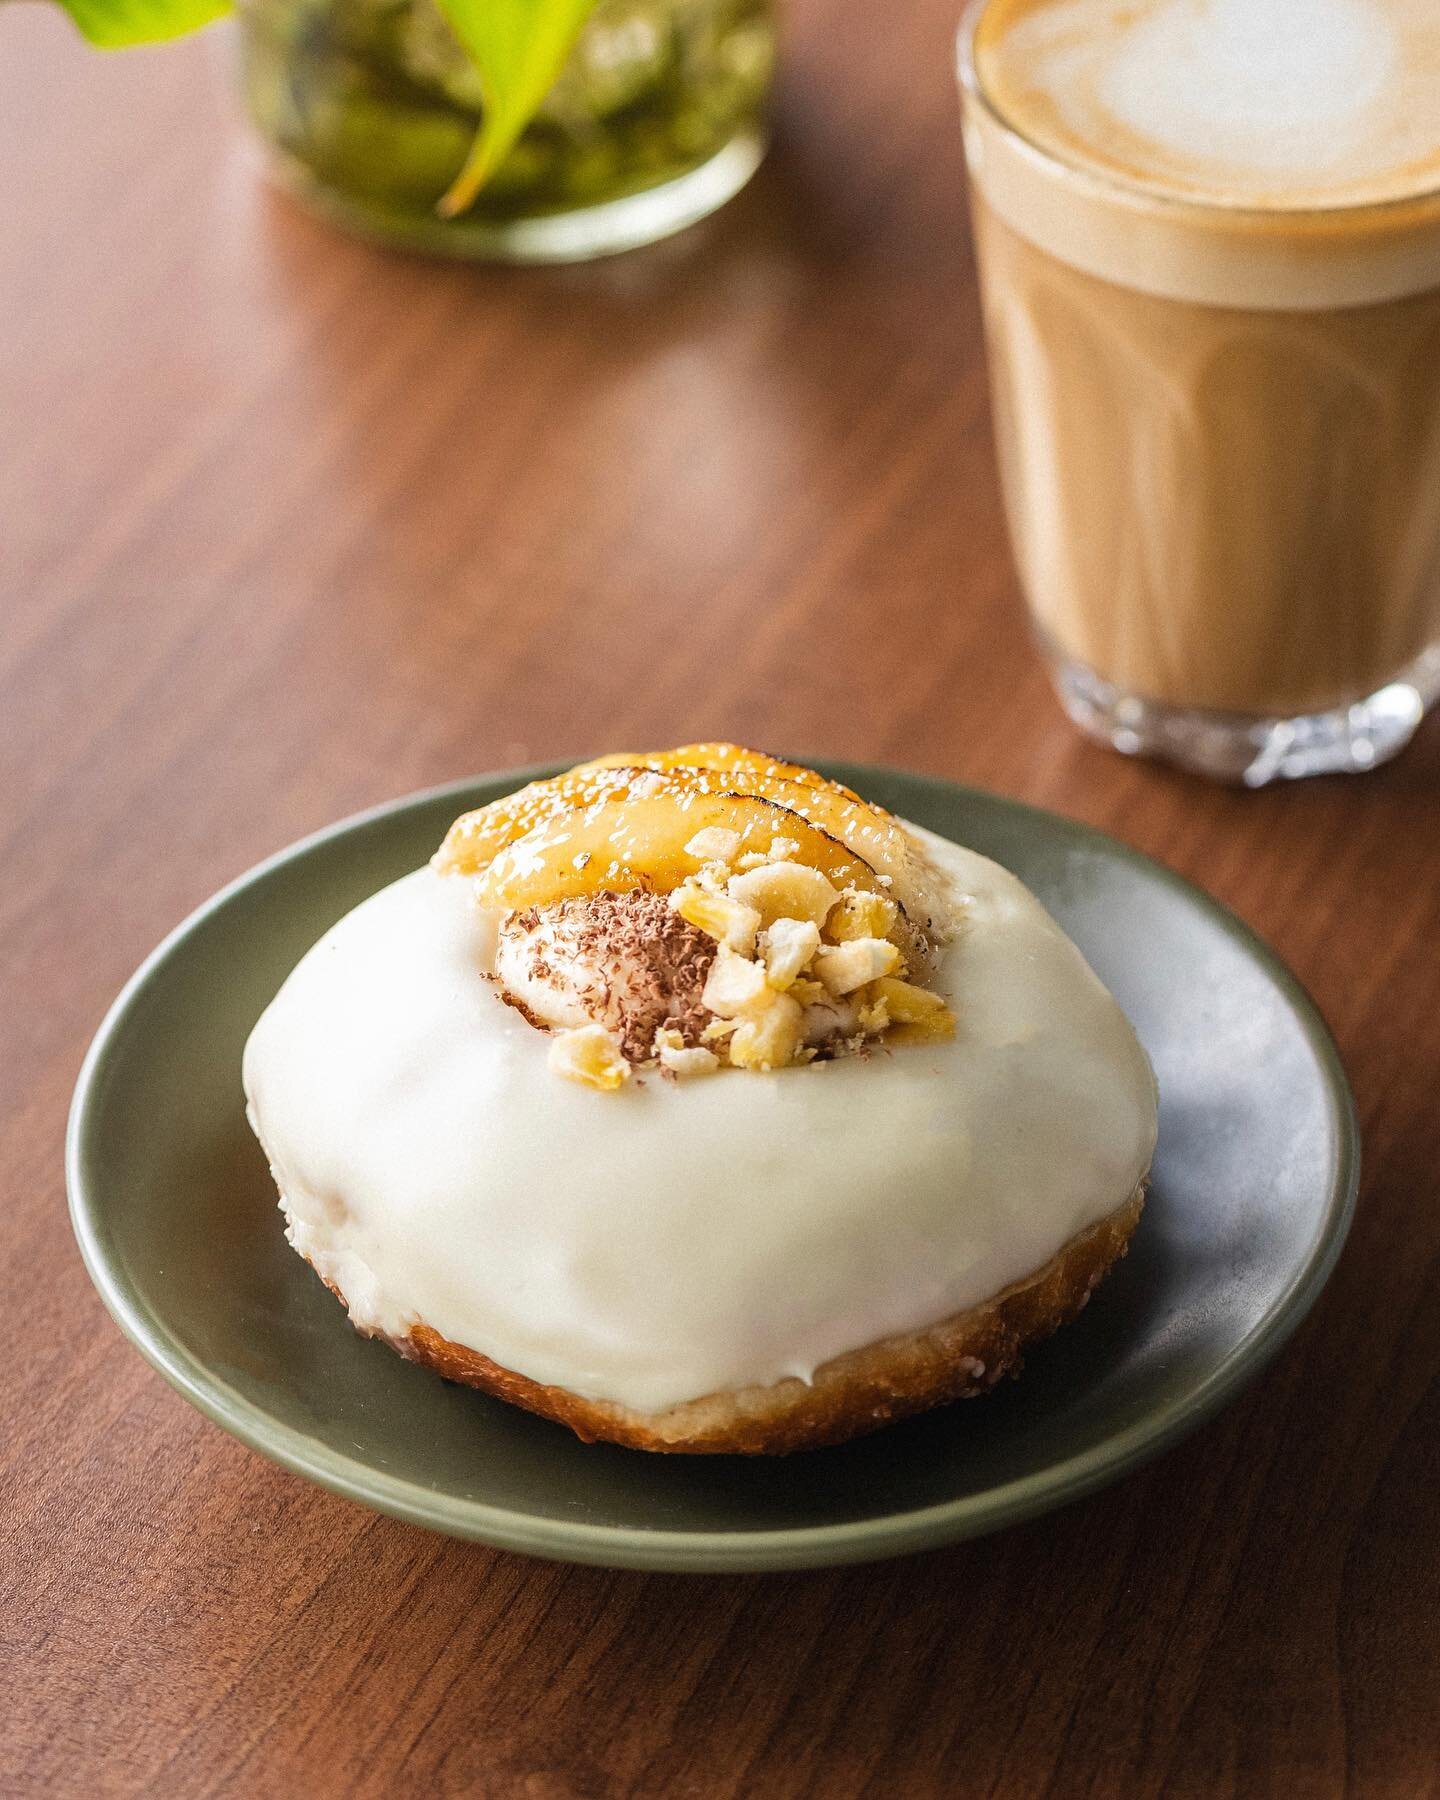 Confirmed: Our April Special Banoffee doughnut is a hit ! 

A yeast raised doughnut dipped in white chocolate glaze, filled with dulce de leche and banana whipped cream, topped with caramelised bananas and banana chips. 

Make sure you pop in to Peck